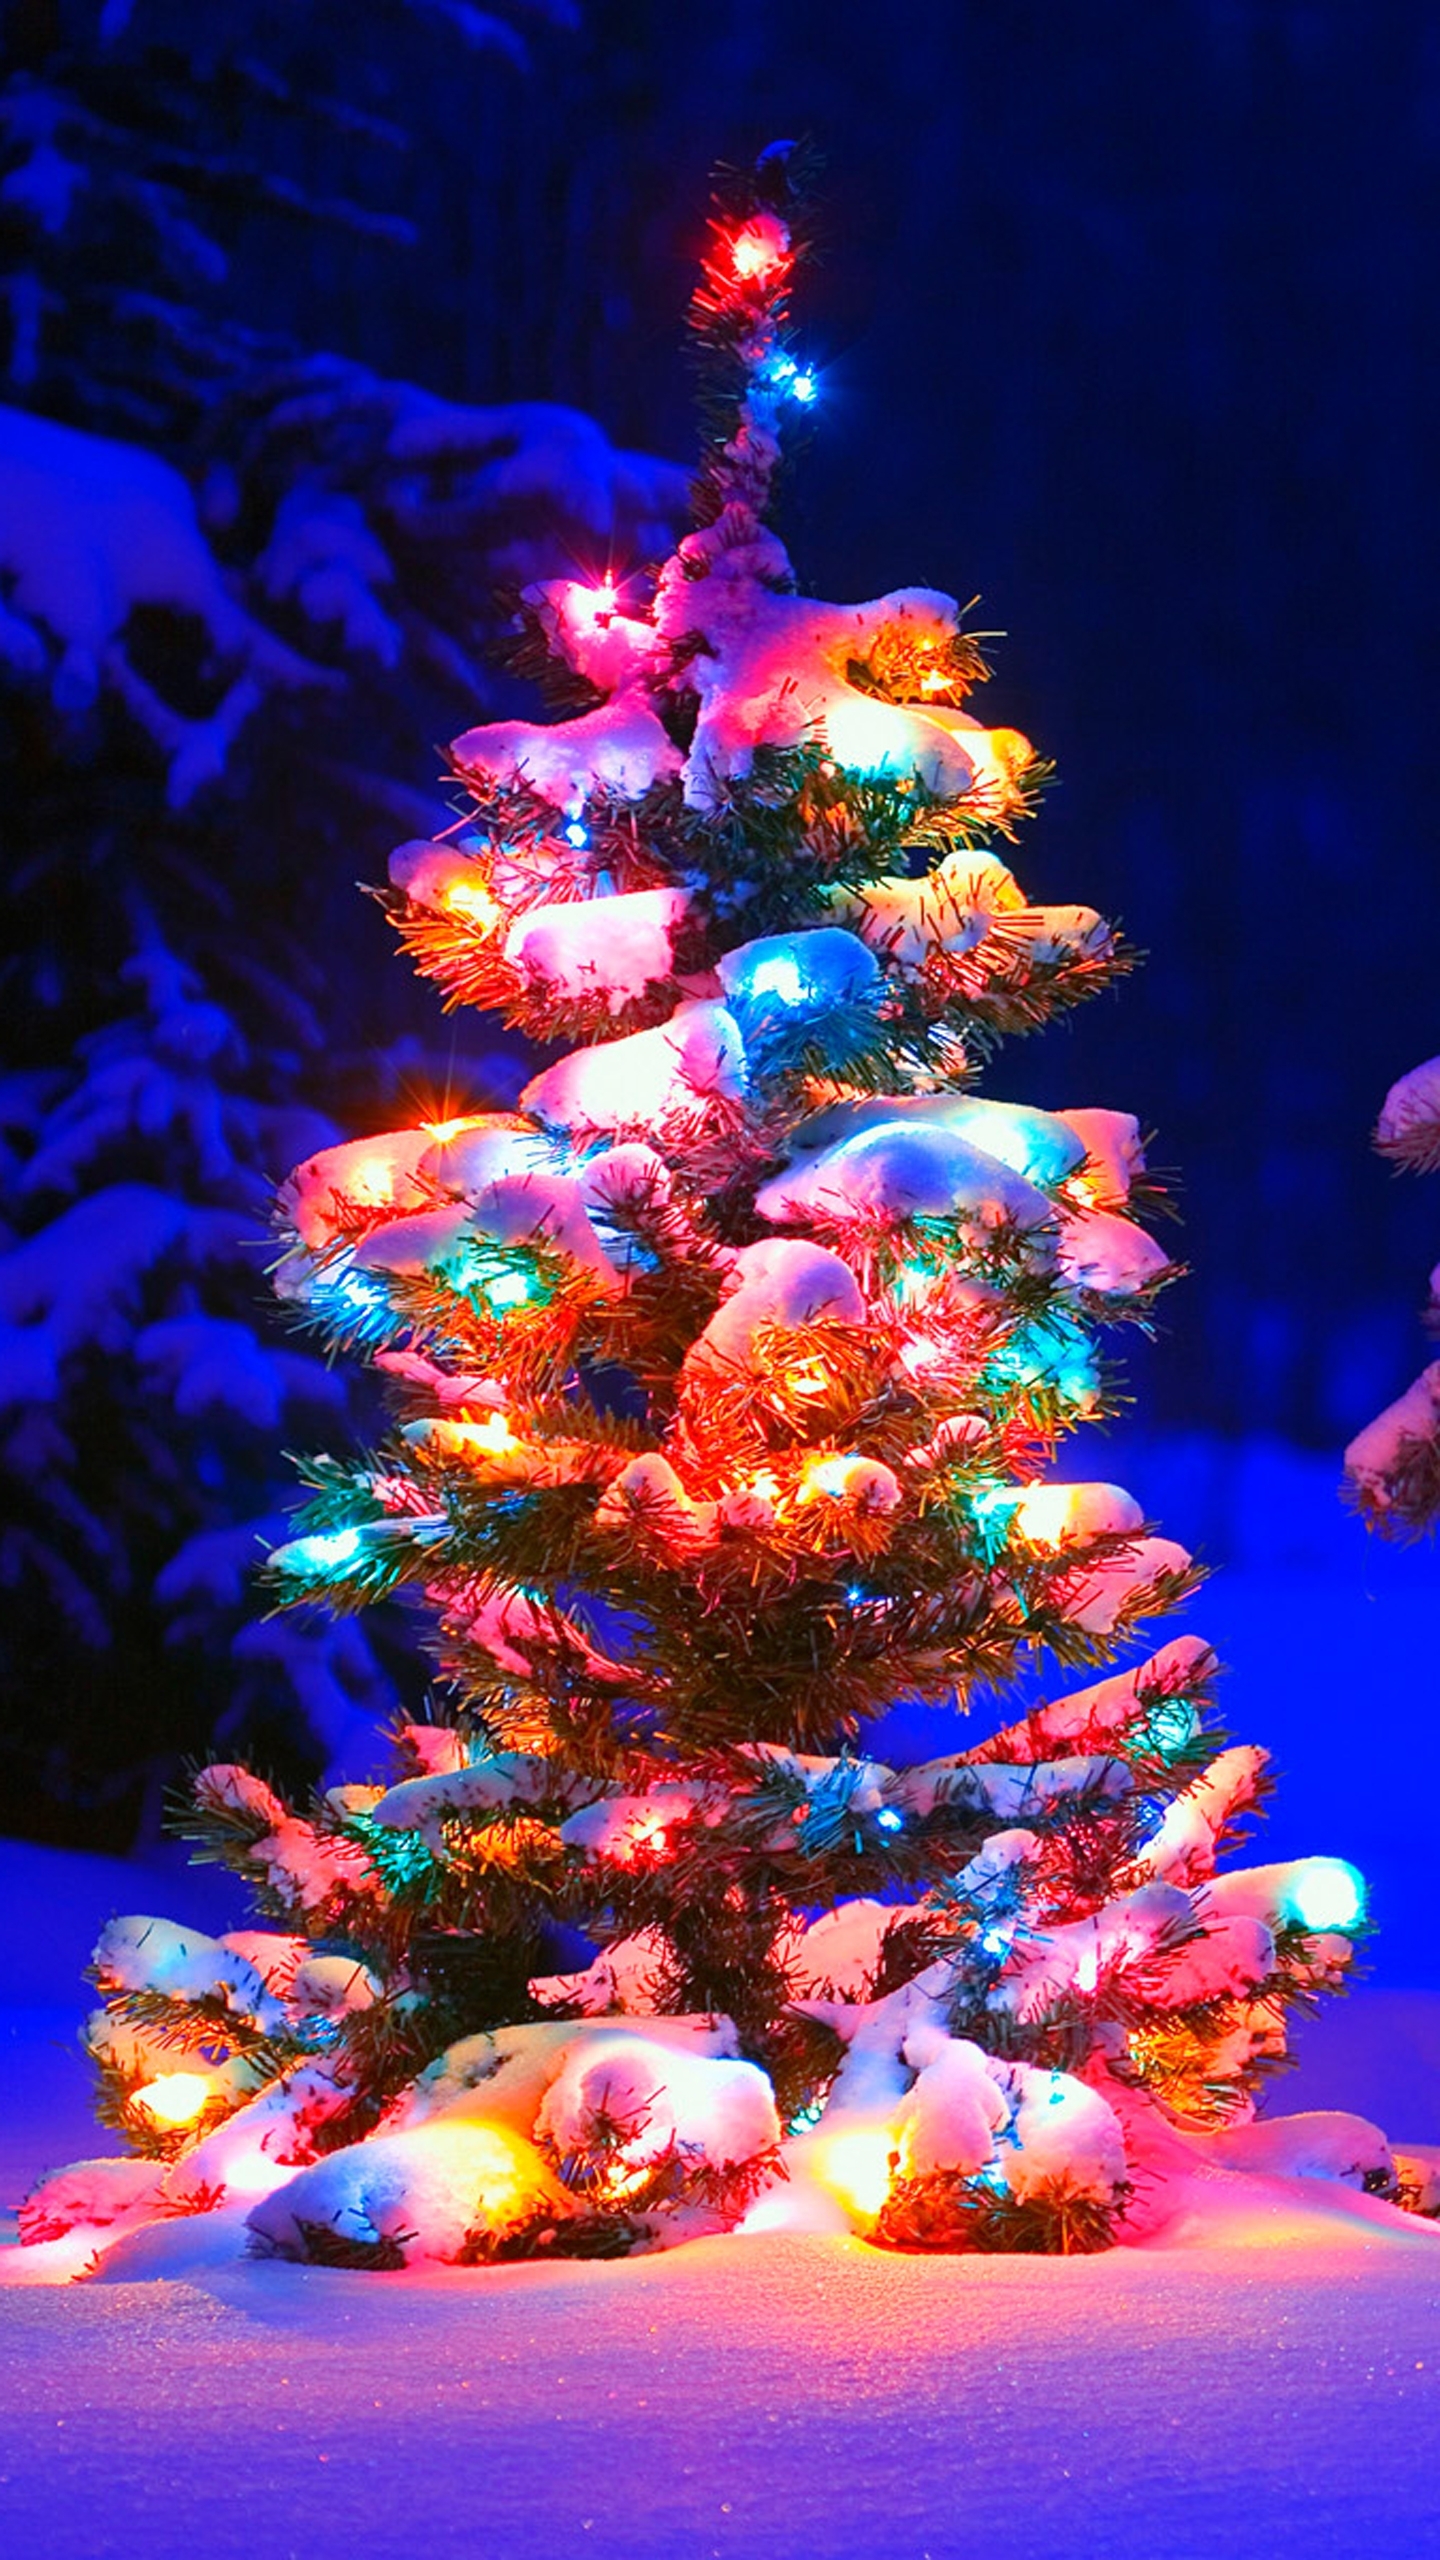 10 Best Christmas Tree Phone Wallpaper FULL HD 1080p For PC Background